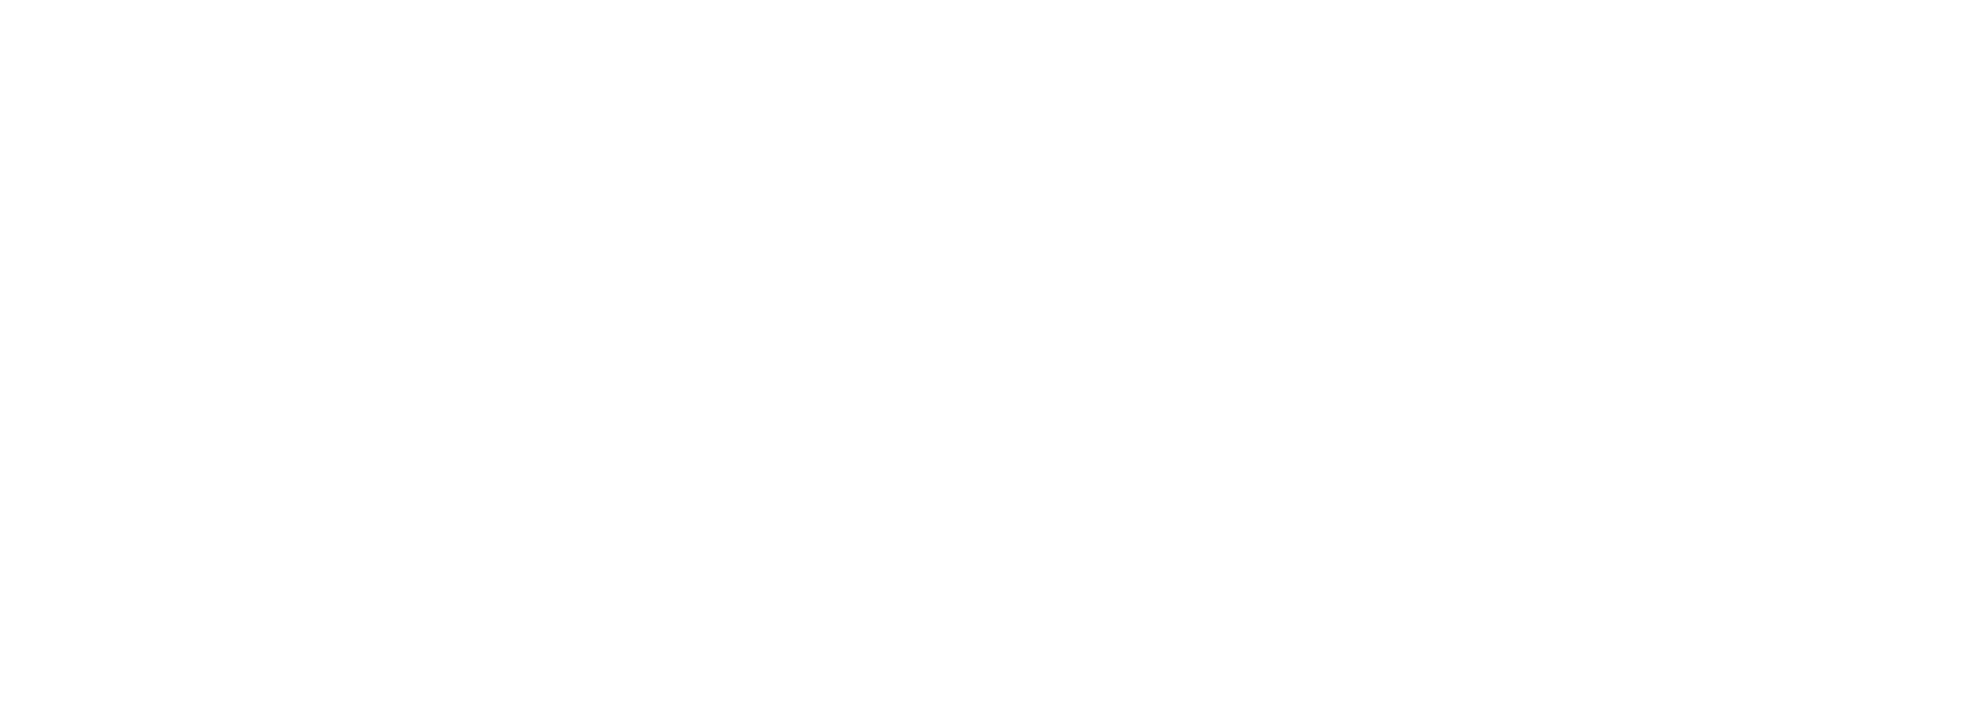 Skills and Jobs Centres